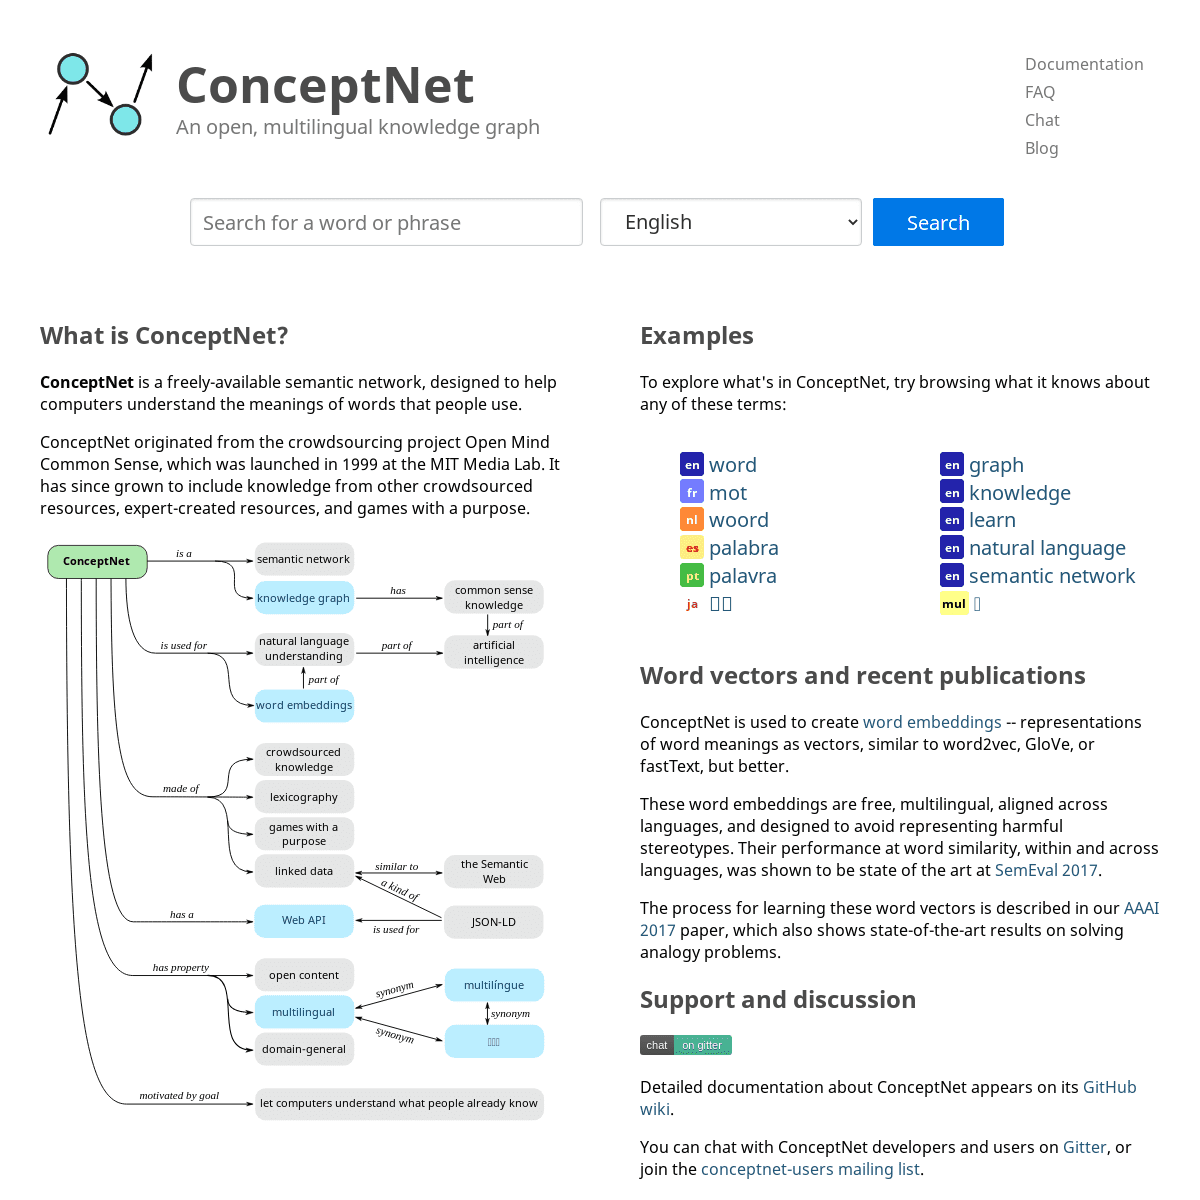 A complete backup of https://conceptnet.io